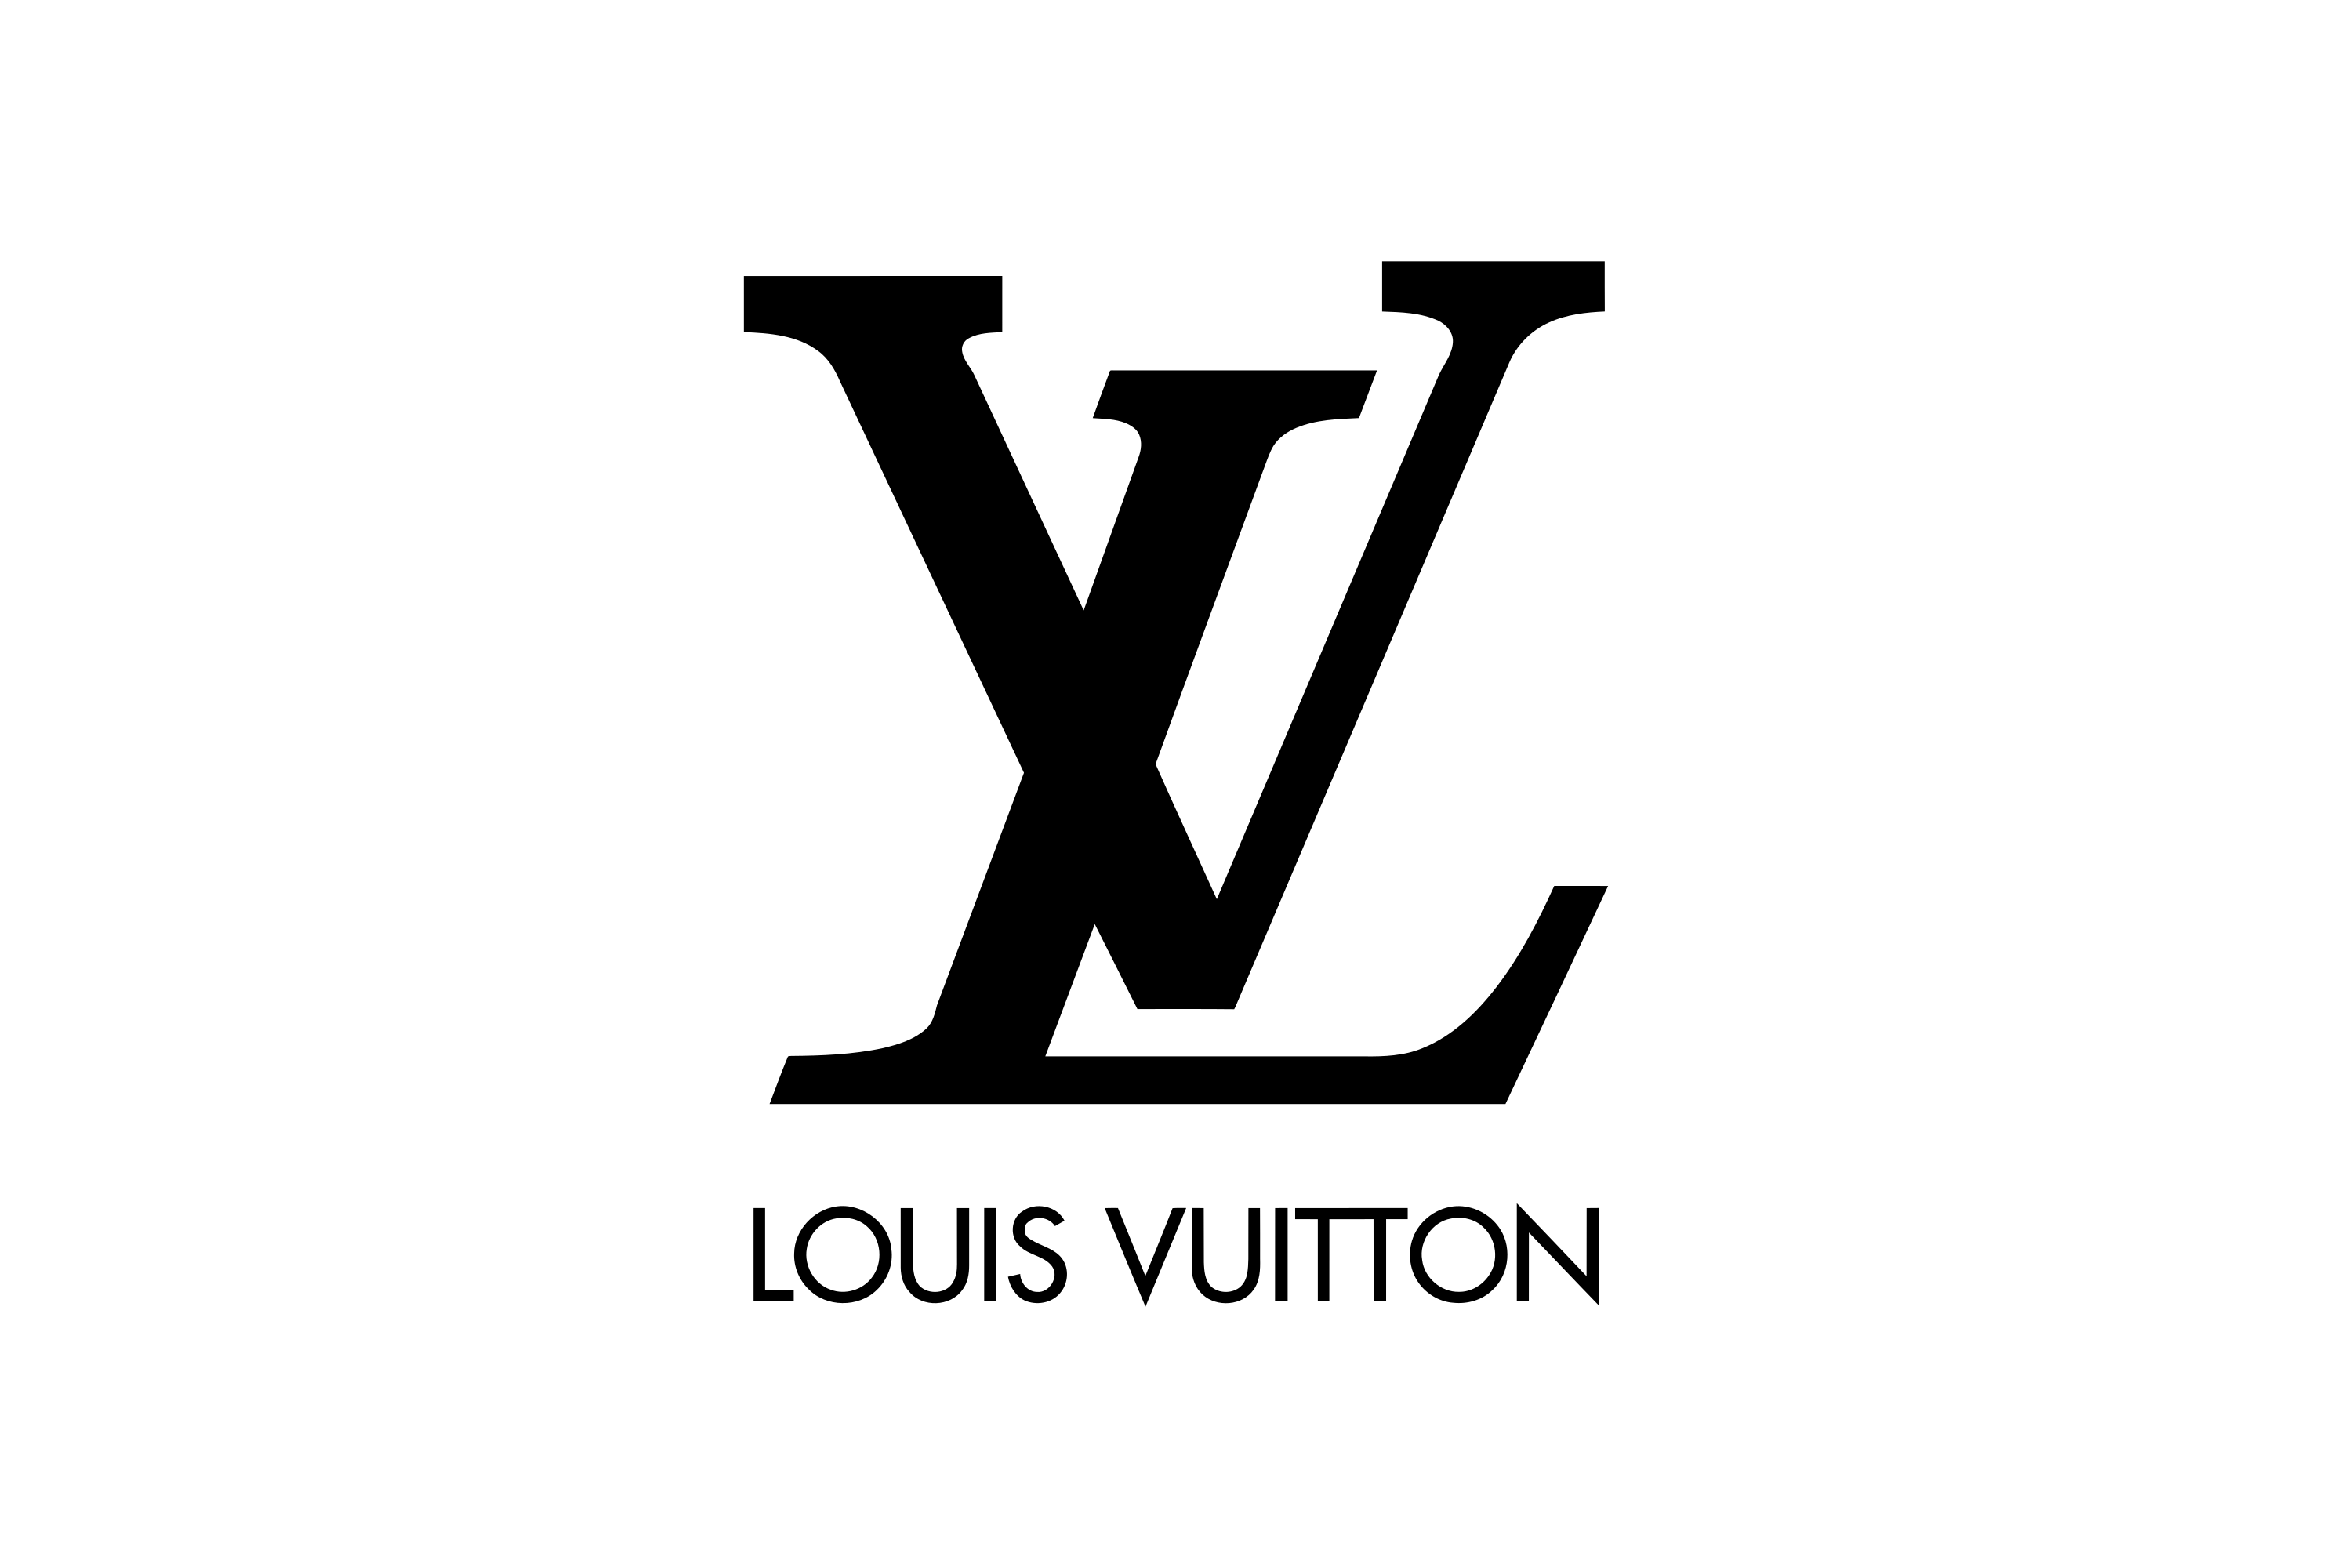 Share This Image - Louis Vuitton Bag Psd Transparent PNG - 827x600 - Free  Download on NicePNG